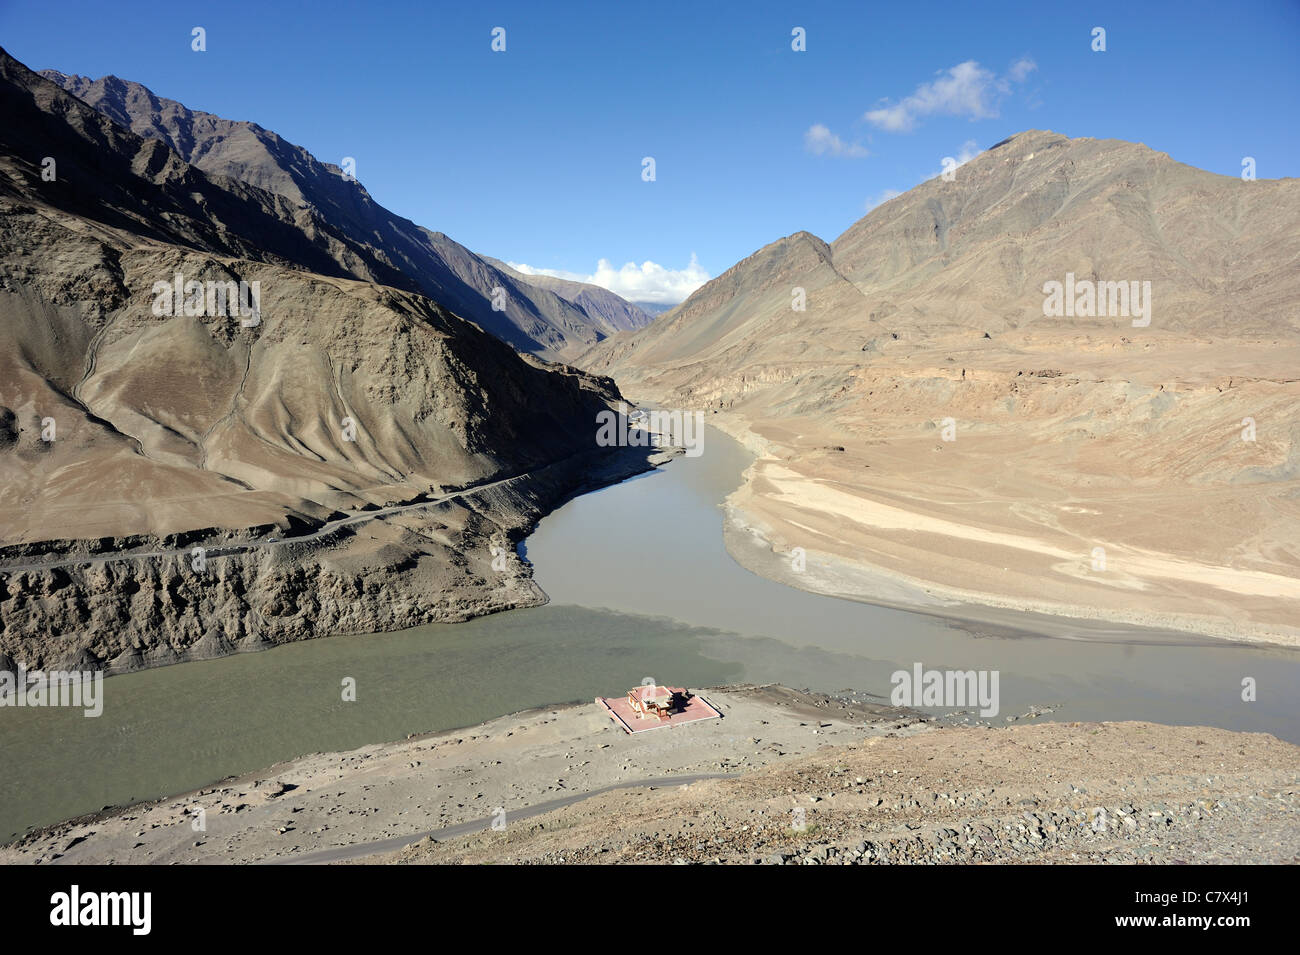 The confluence of the Zanskar, River and the Indus near Nimu. The Indus comes in from the left. Stock Photo